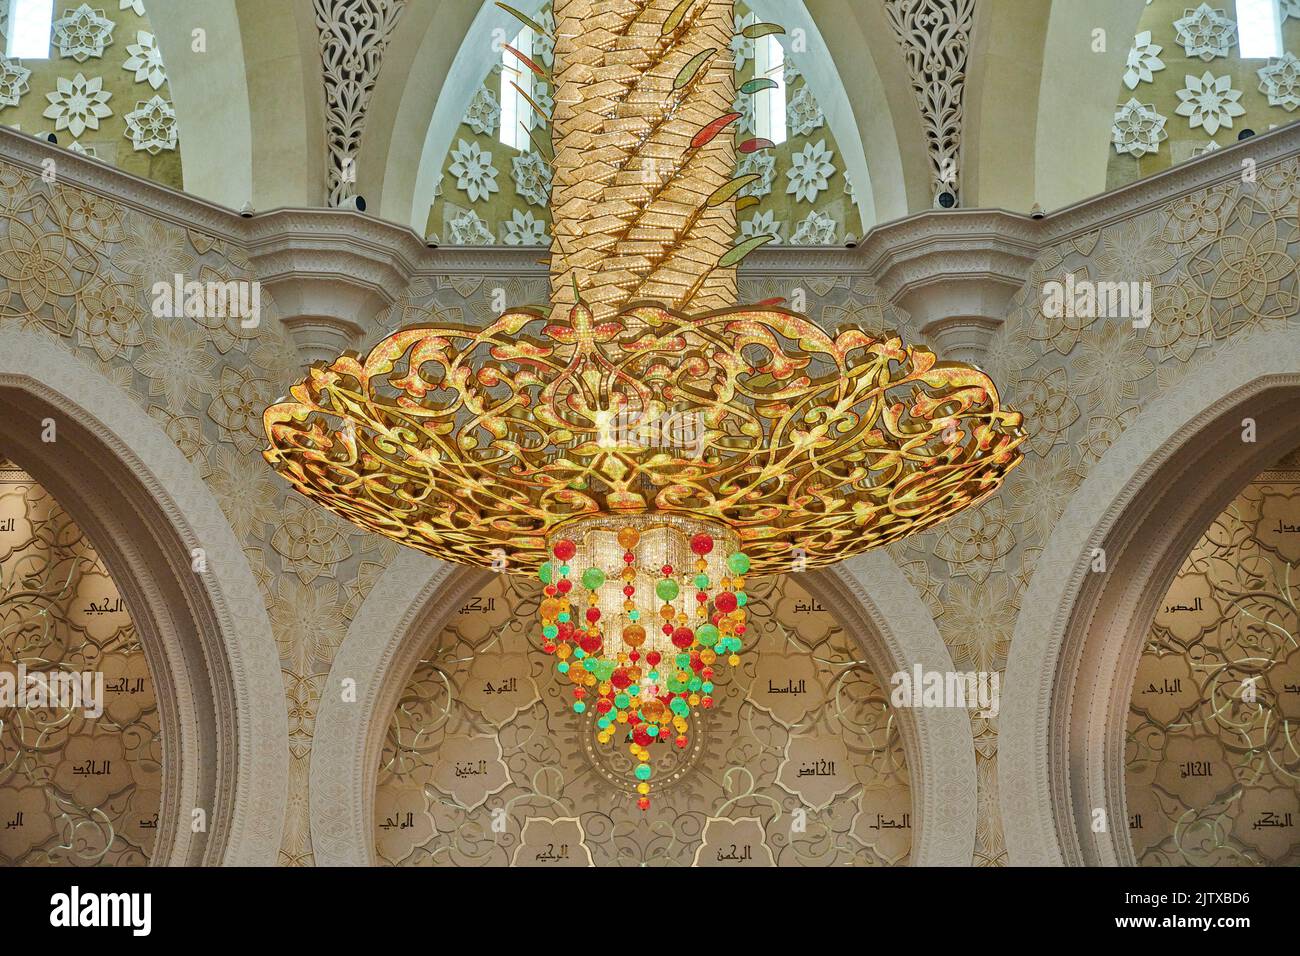 A large decorated chandelier hanging in the prayer room at Sheikh Zayed Mosque. Abu Dhabi. United Arab Emirates. Stock Photo